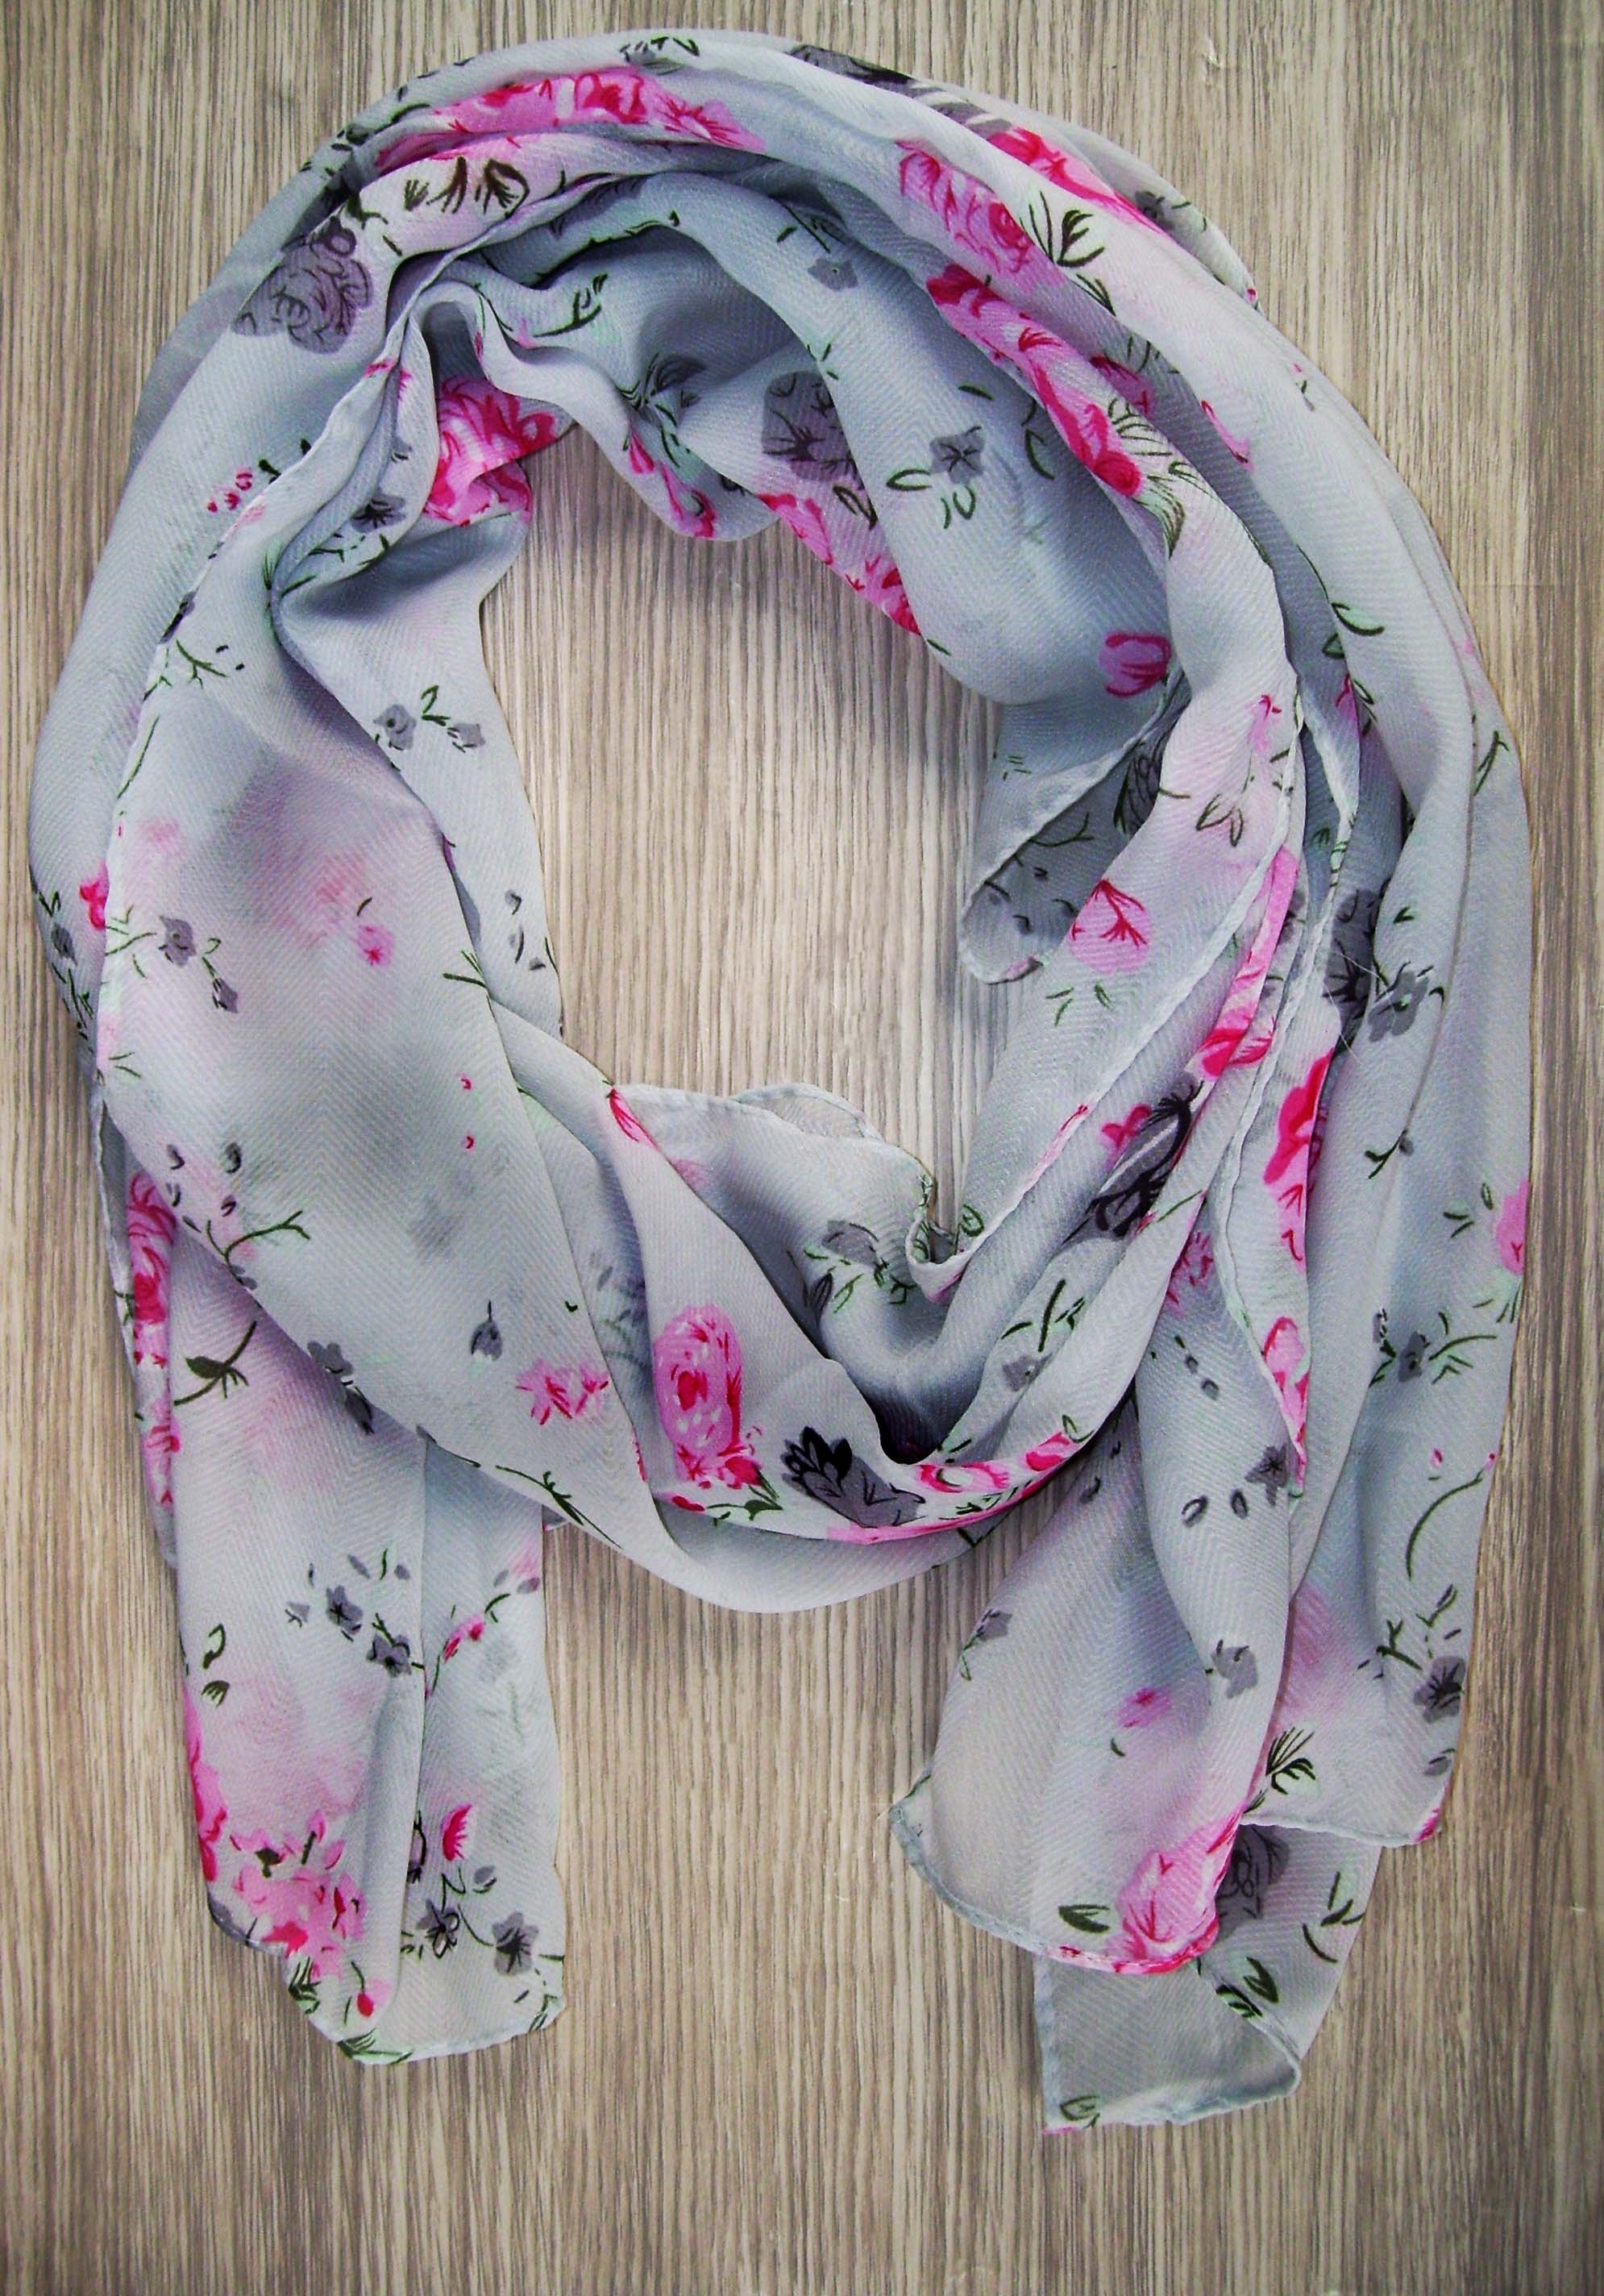 Colorful, Material, A Neckerchief, Scarf, wood - material, pink color